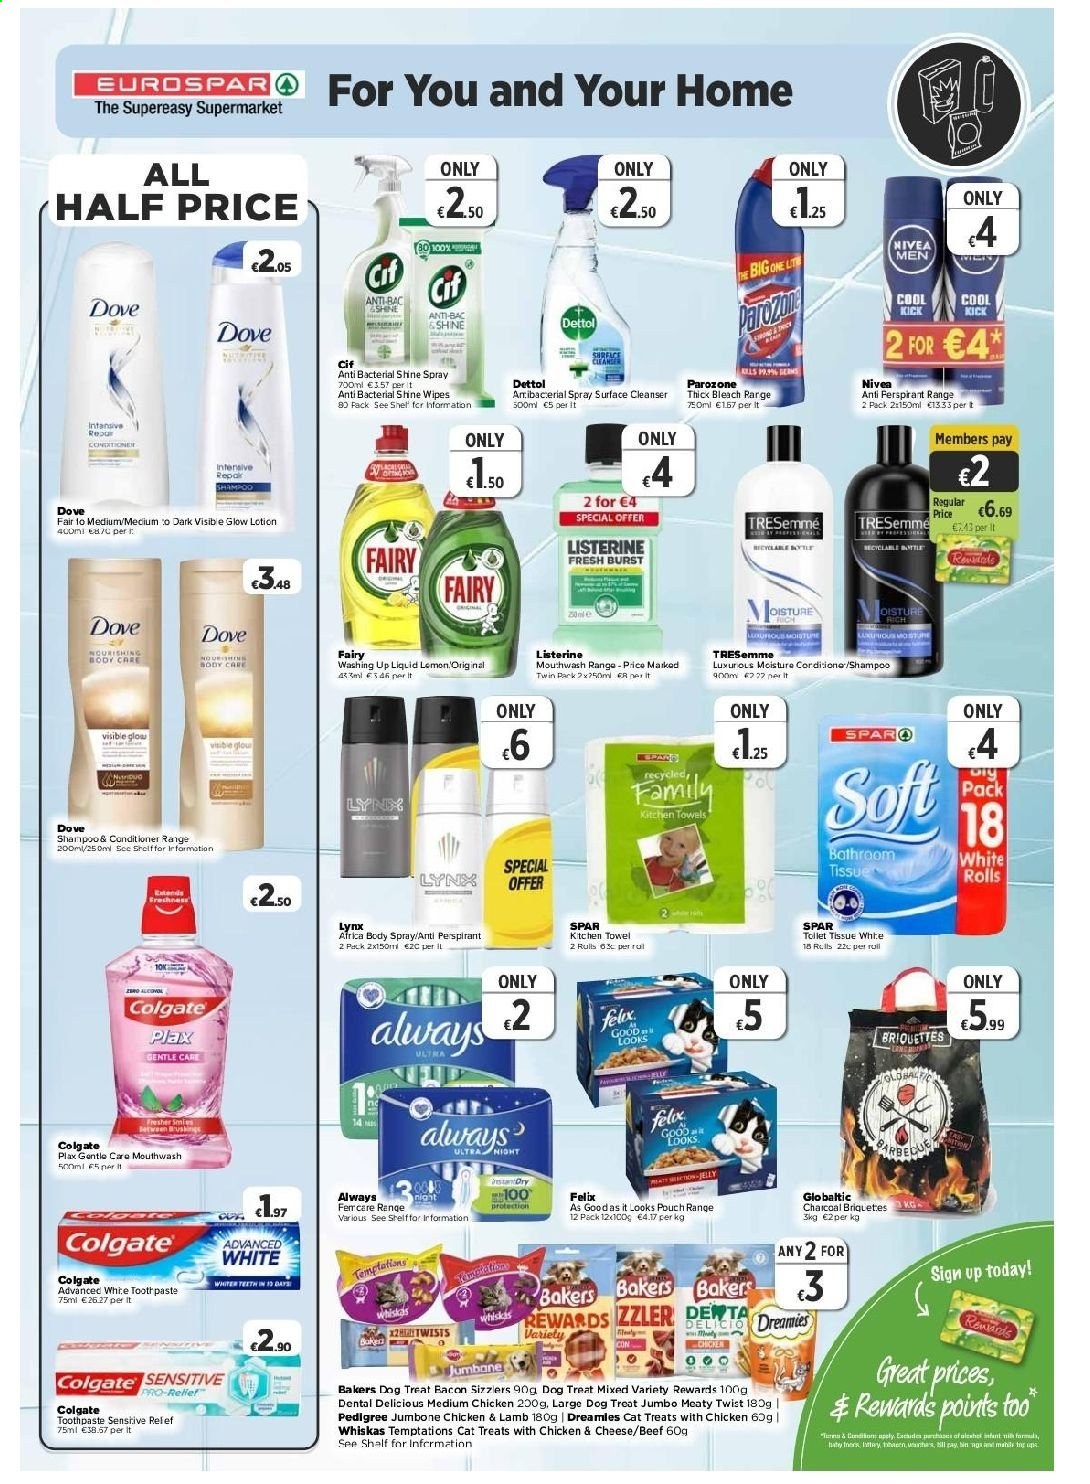 thumbnail - EUROSPAR offer  - 15.04.2021 - 05.05.2021 - Sales products - bacon, jelly, wipes, Dettol, Nivea, Dove, bath tissue, kitchen towels, bleach, Fairy, Cif, thick bleach, dishwashing liquid, shampoo, Colgate, Listerine, toothpaste, mouthwash, Plax, cleanser, TRESemmé, body lotion, body spray, Whiskas, Pedigree, Felix, Bakers. Page 7.